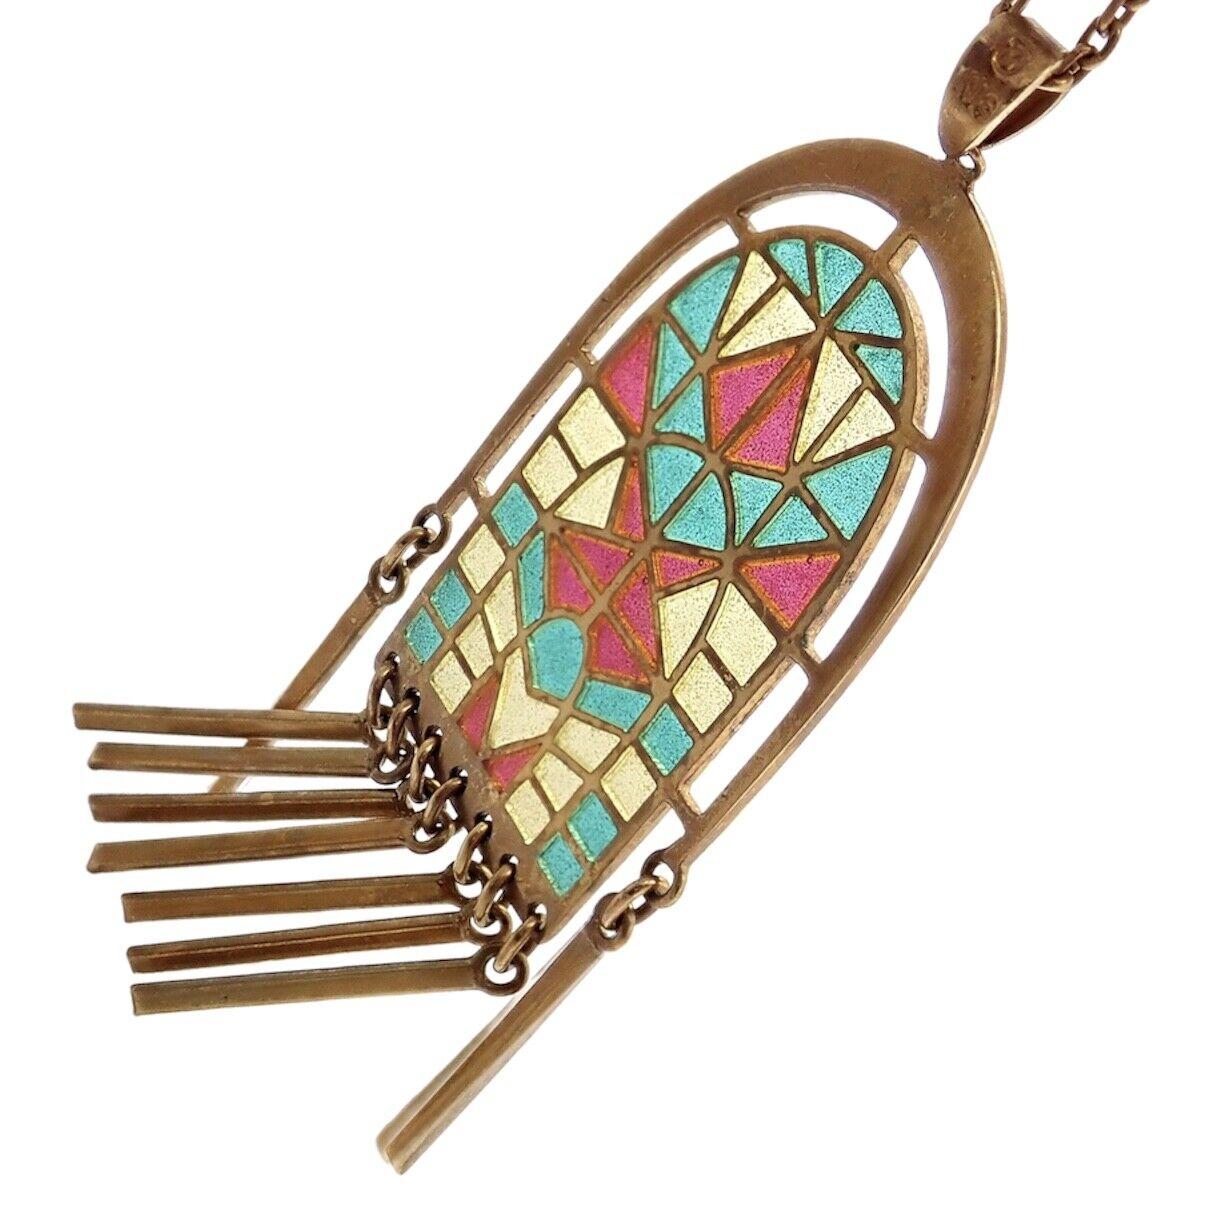 18k Yellow Gold Stained Glass Window Pendant Necklace by Mikimoto. 
With Beautiful Stained Glass Window Pendant
Details: 
Length: 22